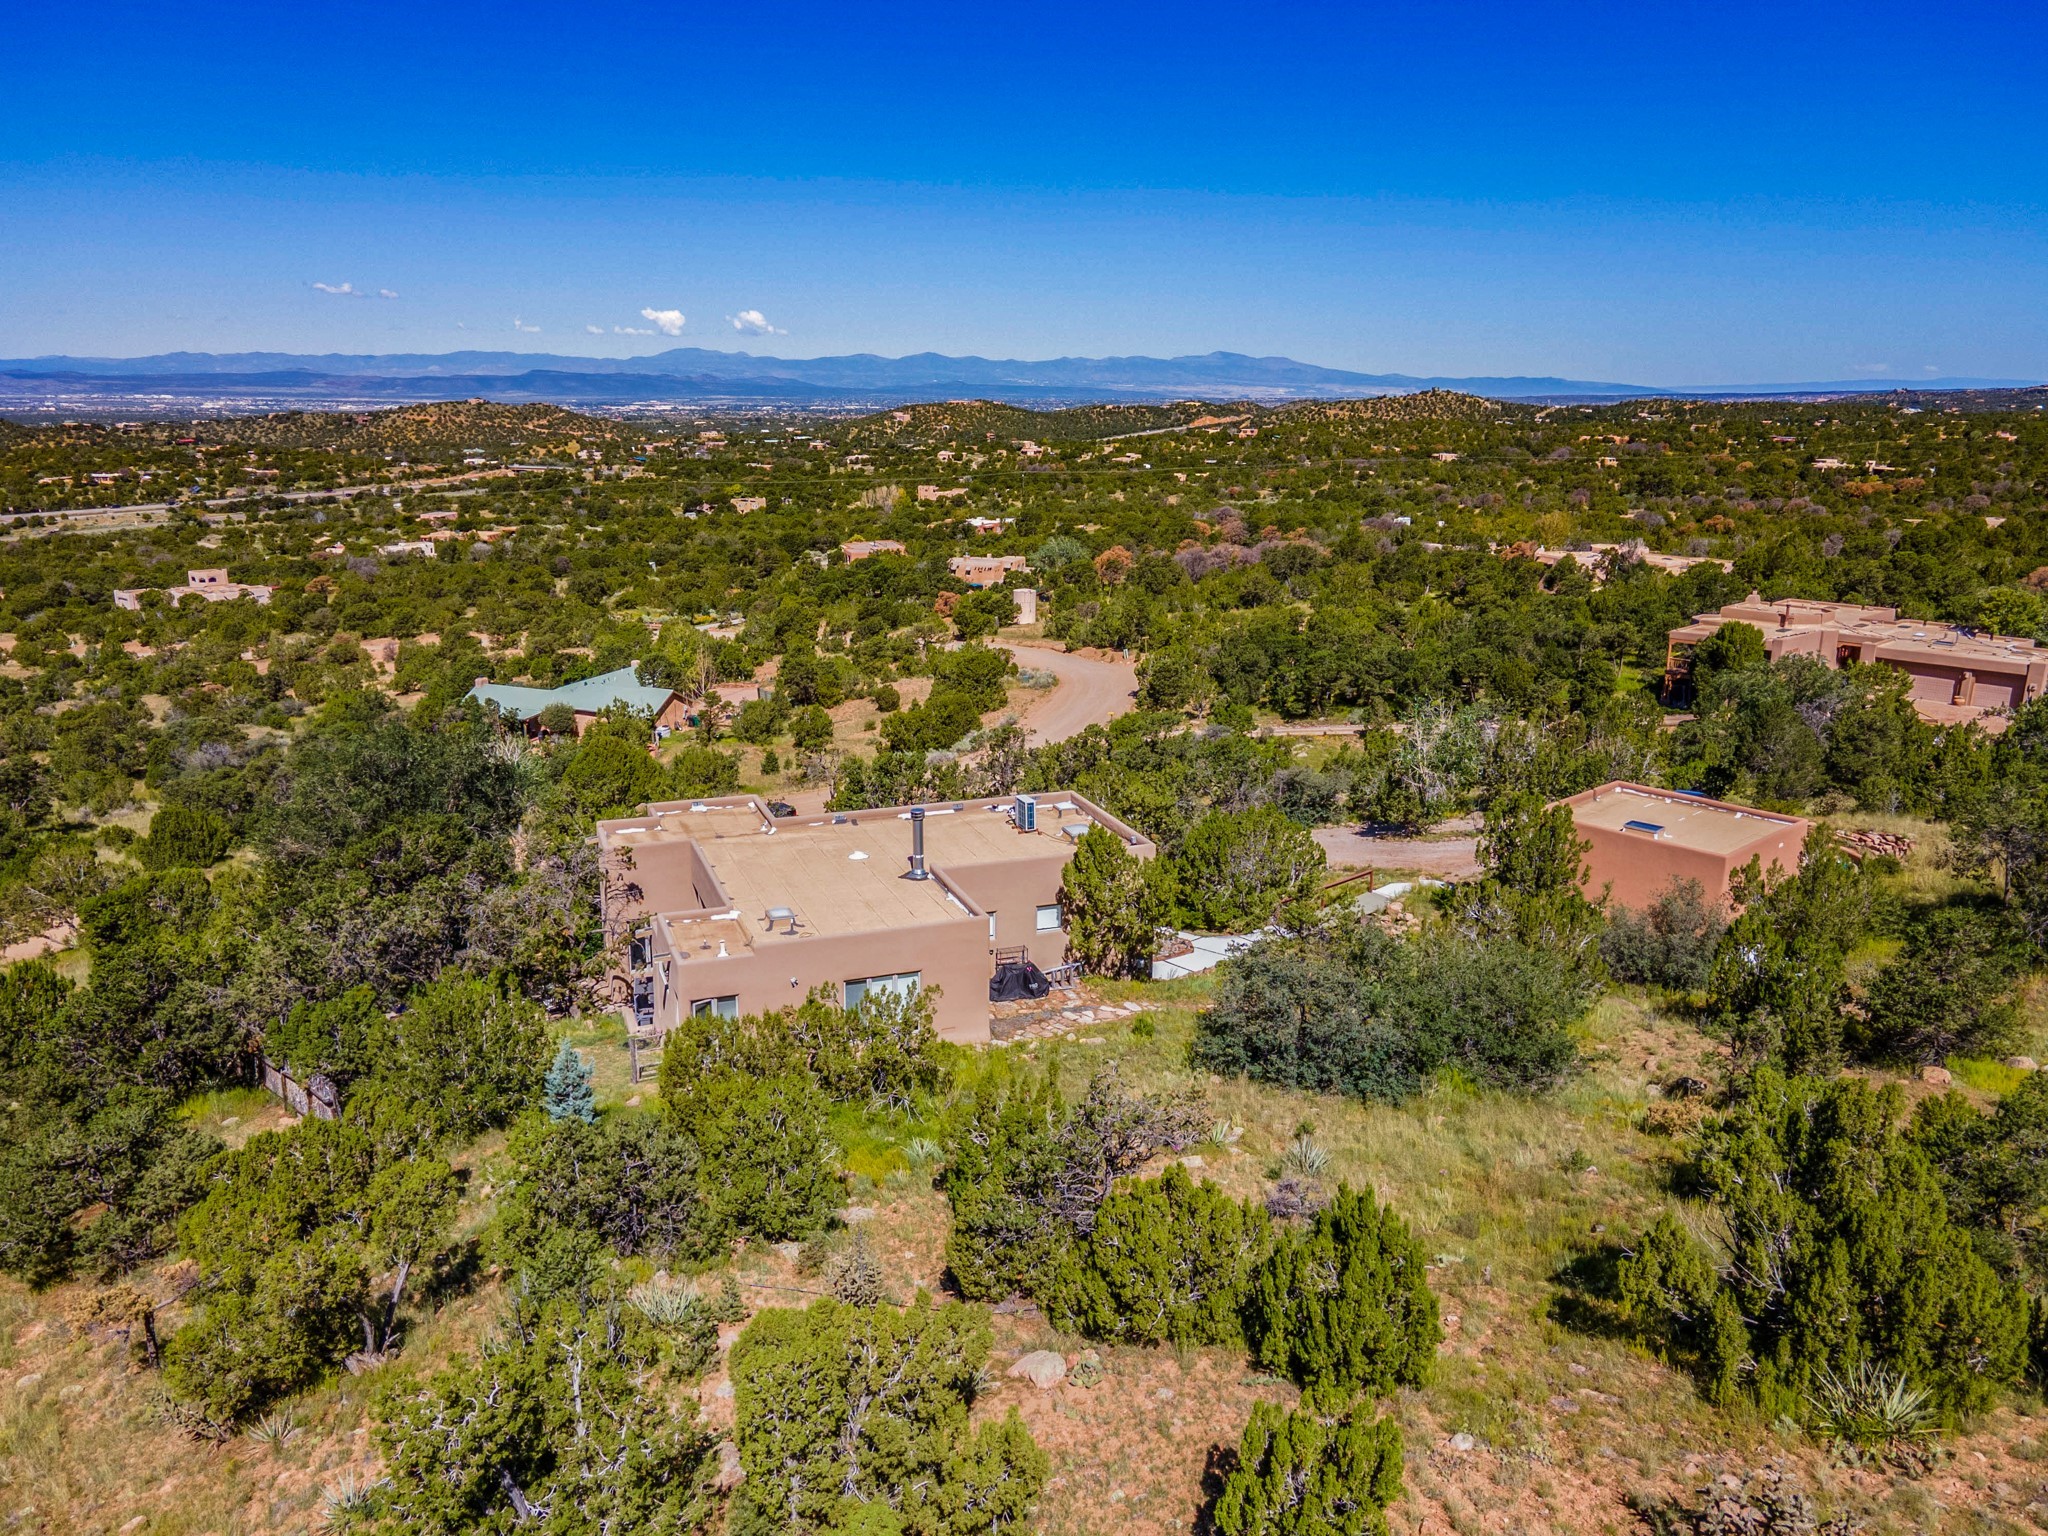 43 Calimo Circle, Santa Fe, New Mexico 87505, 2 Bedrooms Bedrooms, ,2 BathroomsBathrooms,Residential,For Sale,43 Calimo Circle,202232892